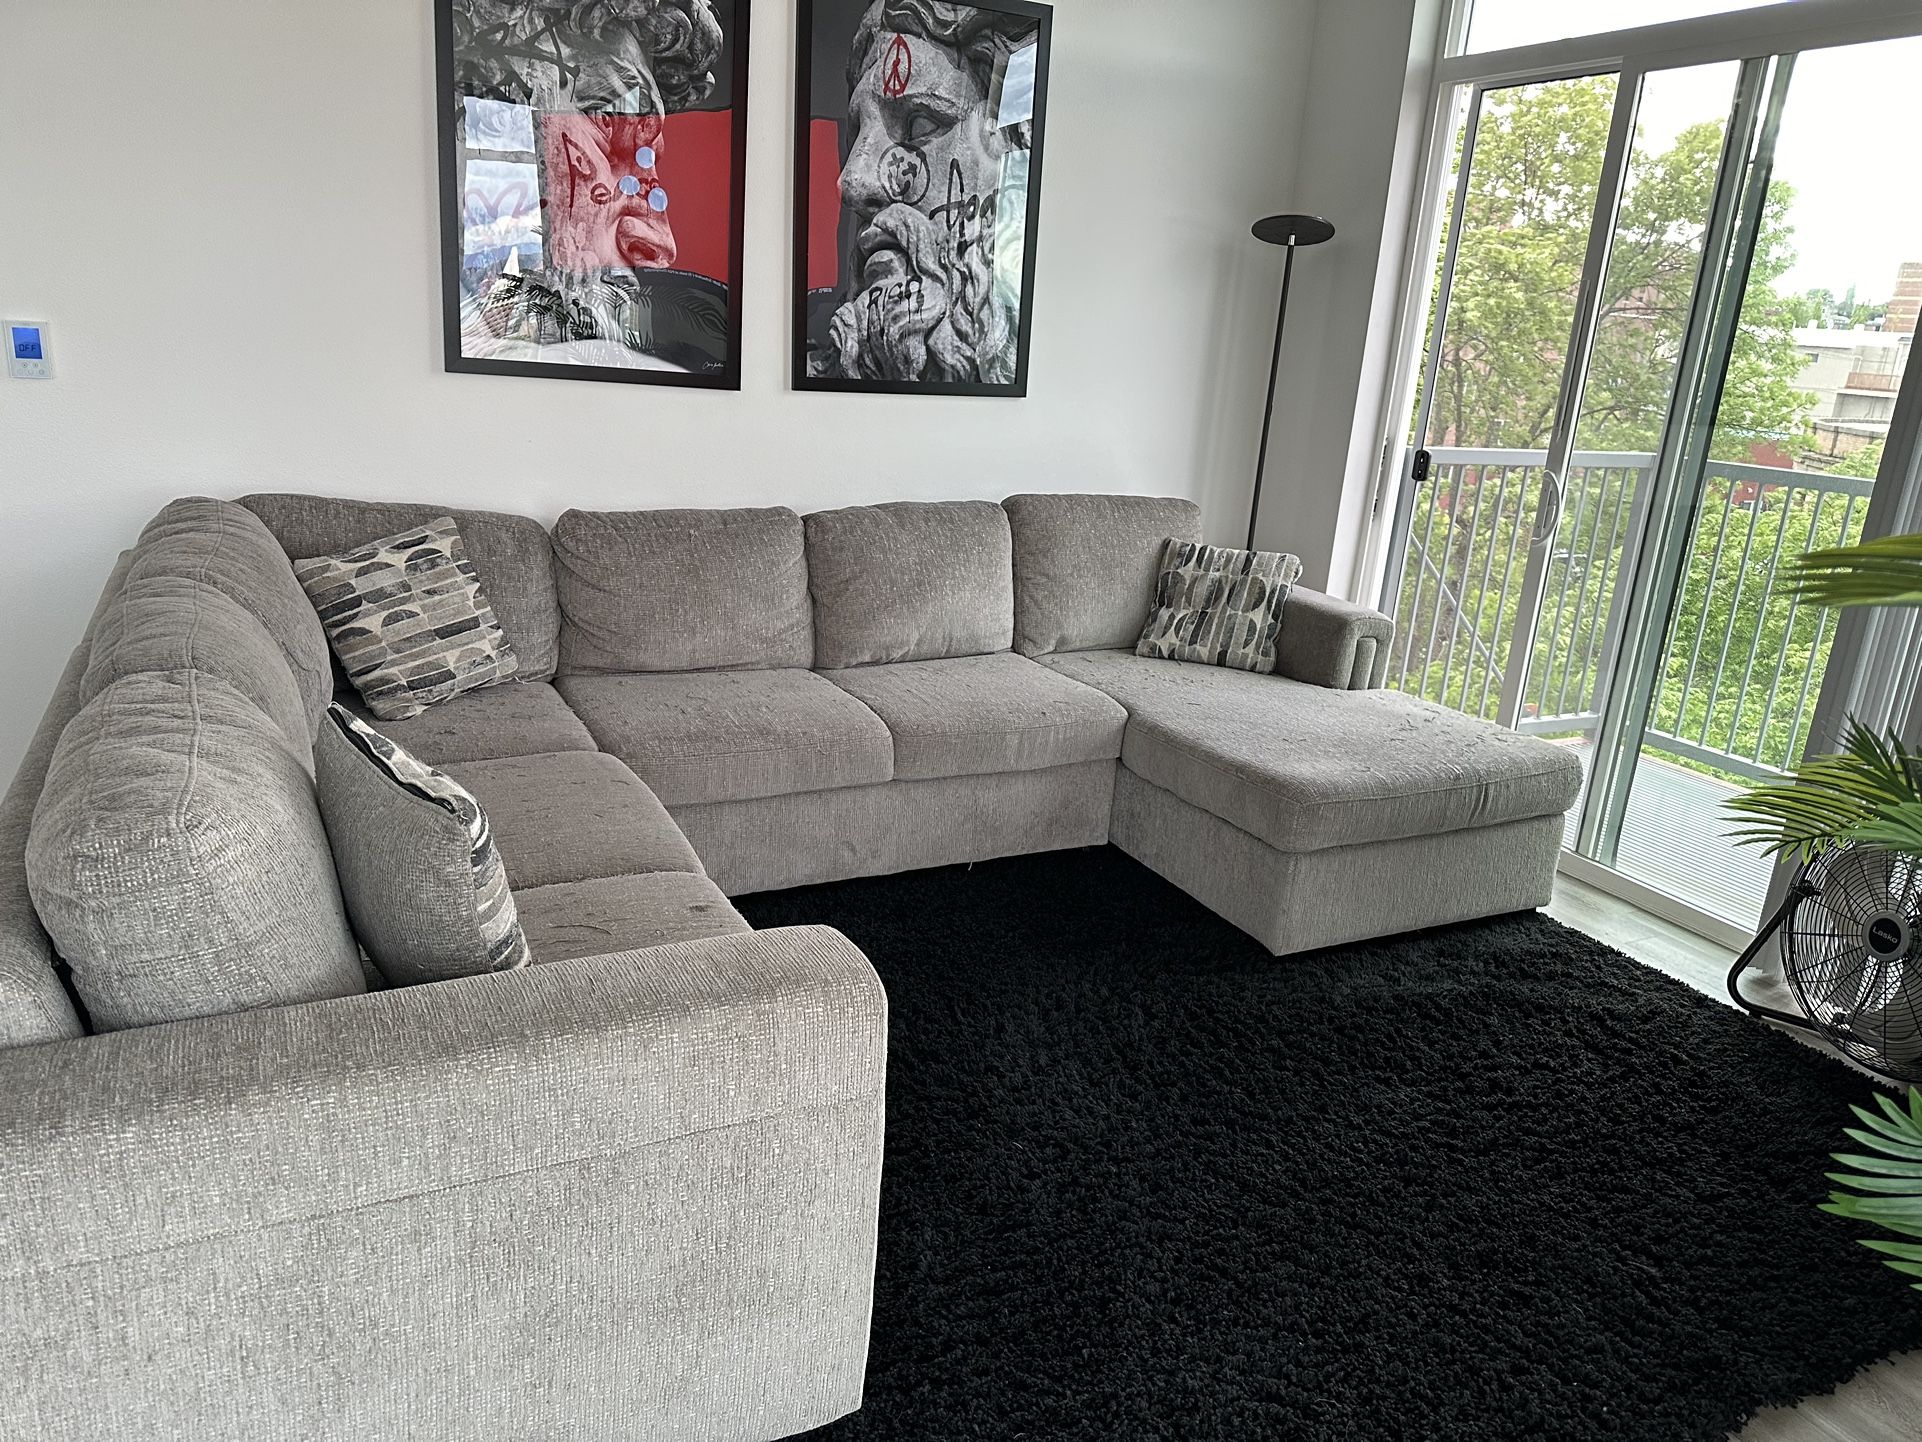 Sectional Sofa With Storage Space